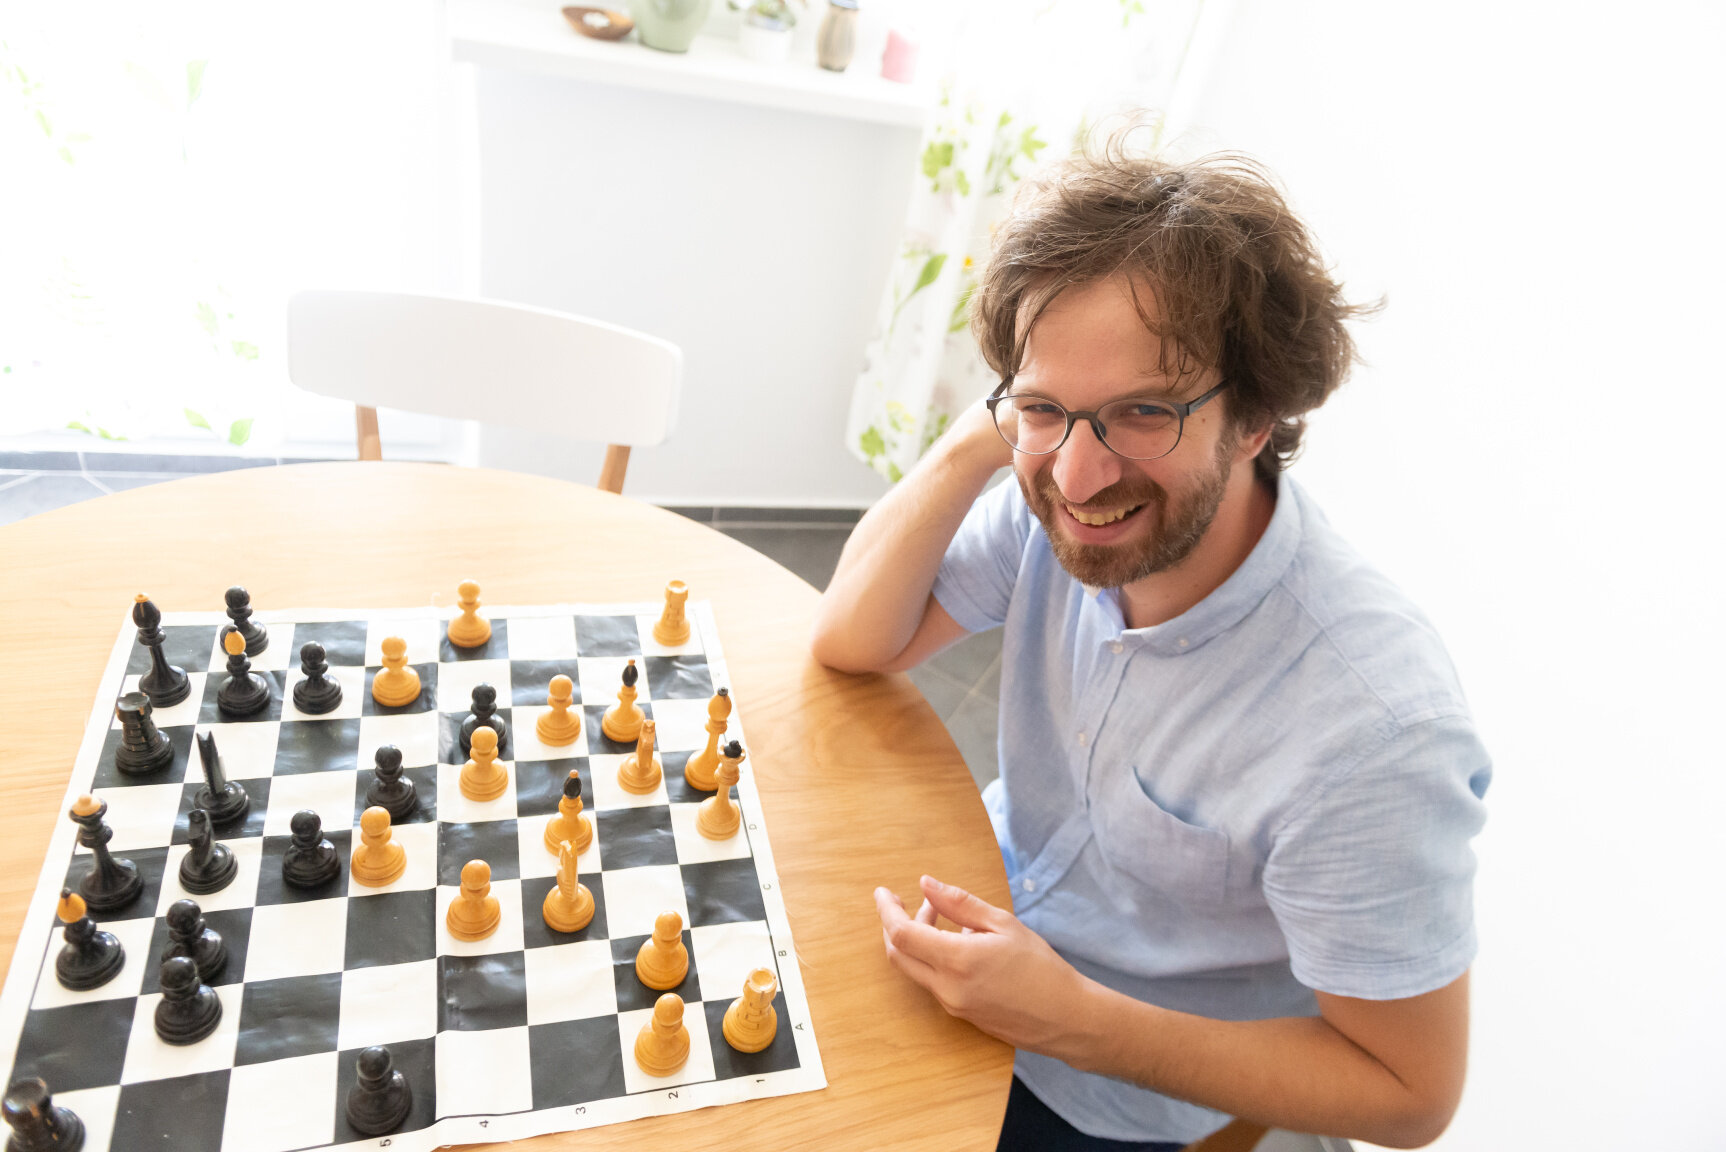 Chessable - Today's Chessable blog is a guest post by GM